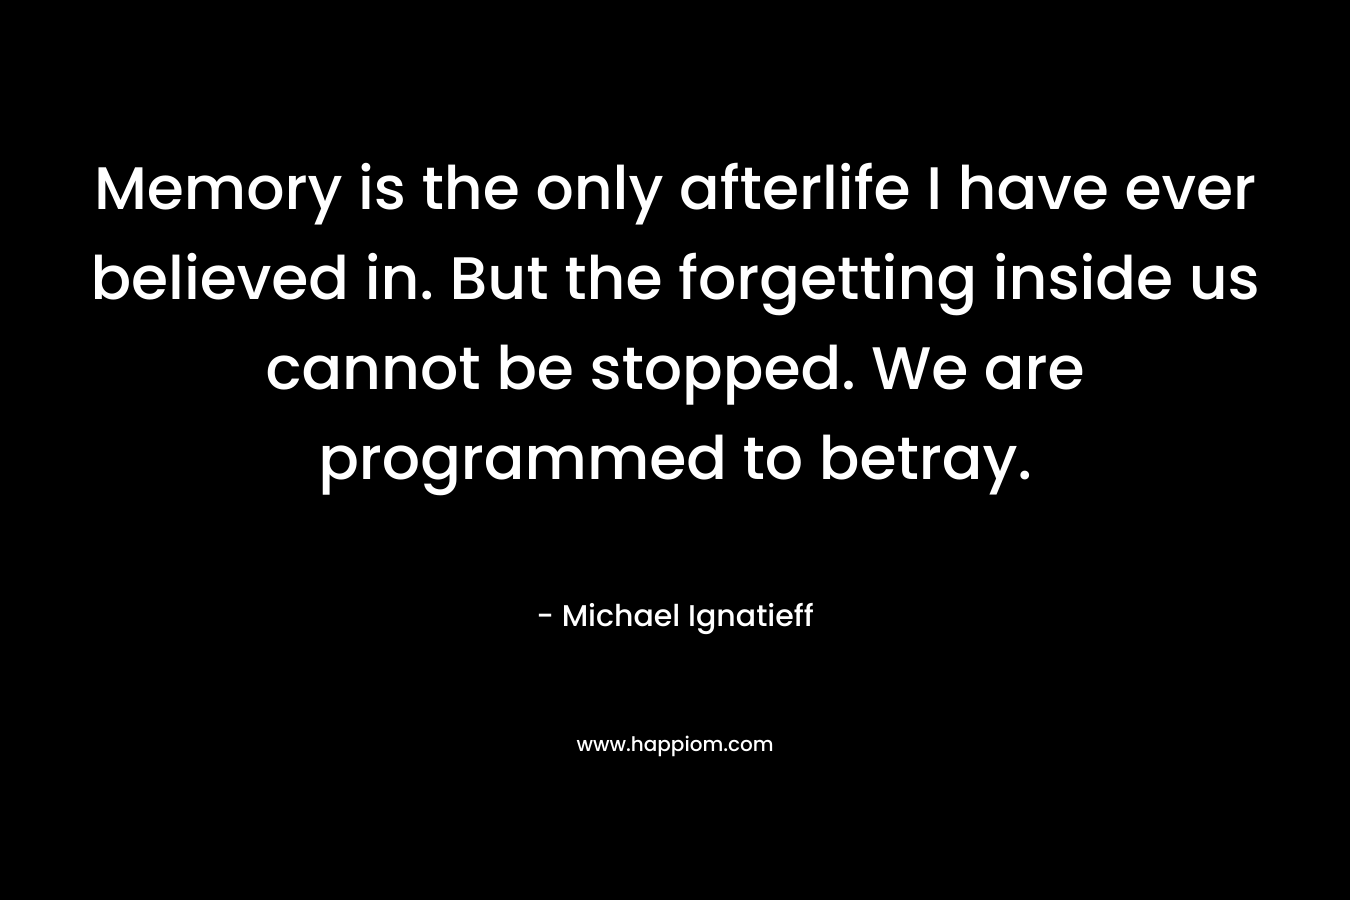 Memory is the only afterlife I have ever believed in. But the forgetting inside us cannot be stopped. We are programmed to betray.